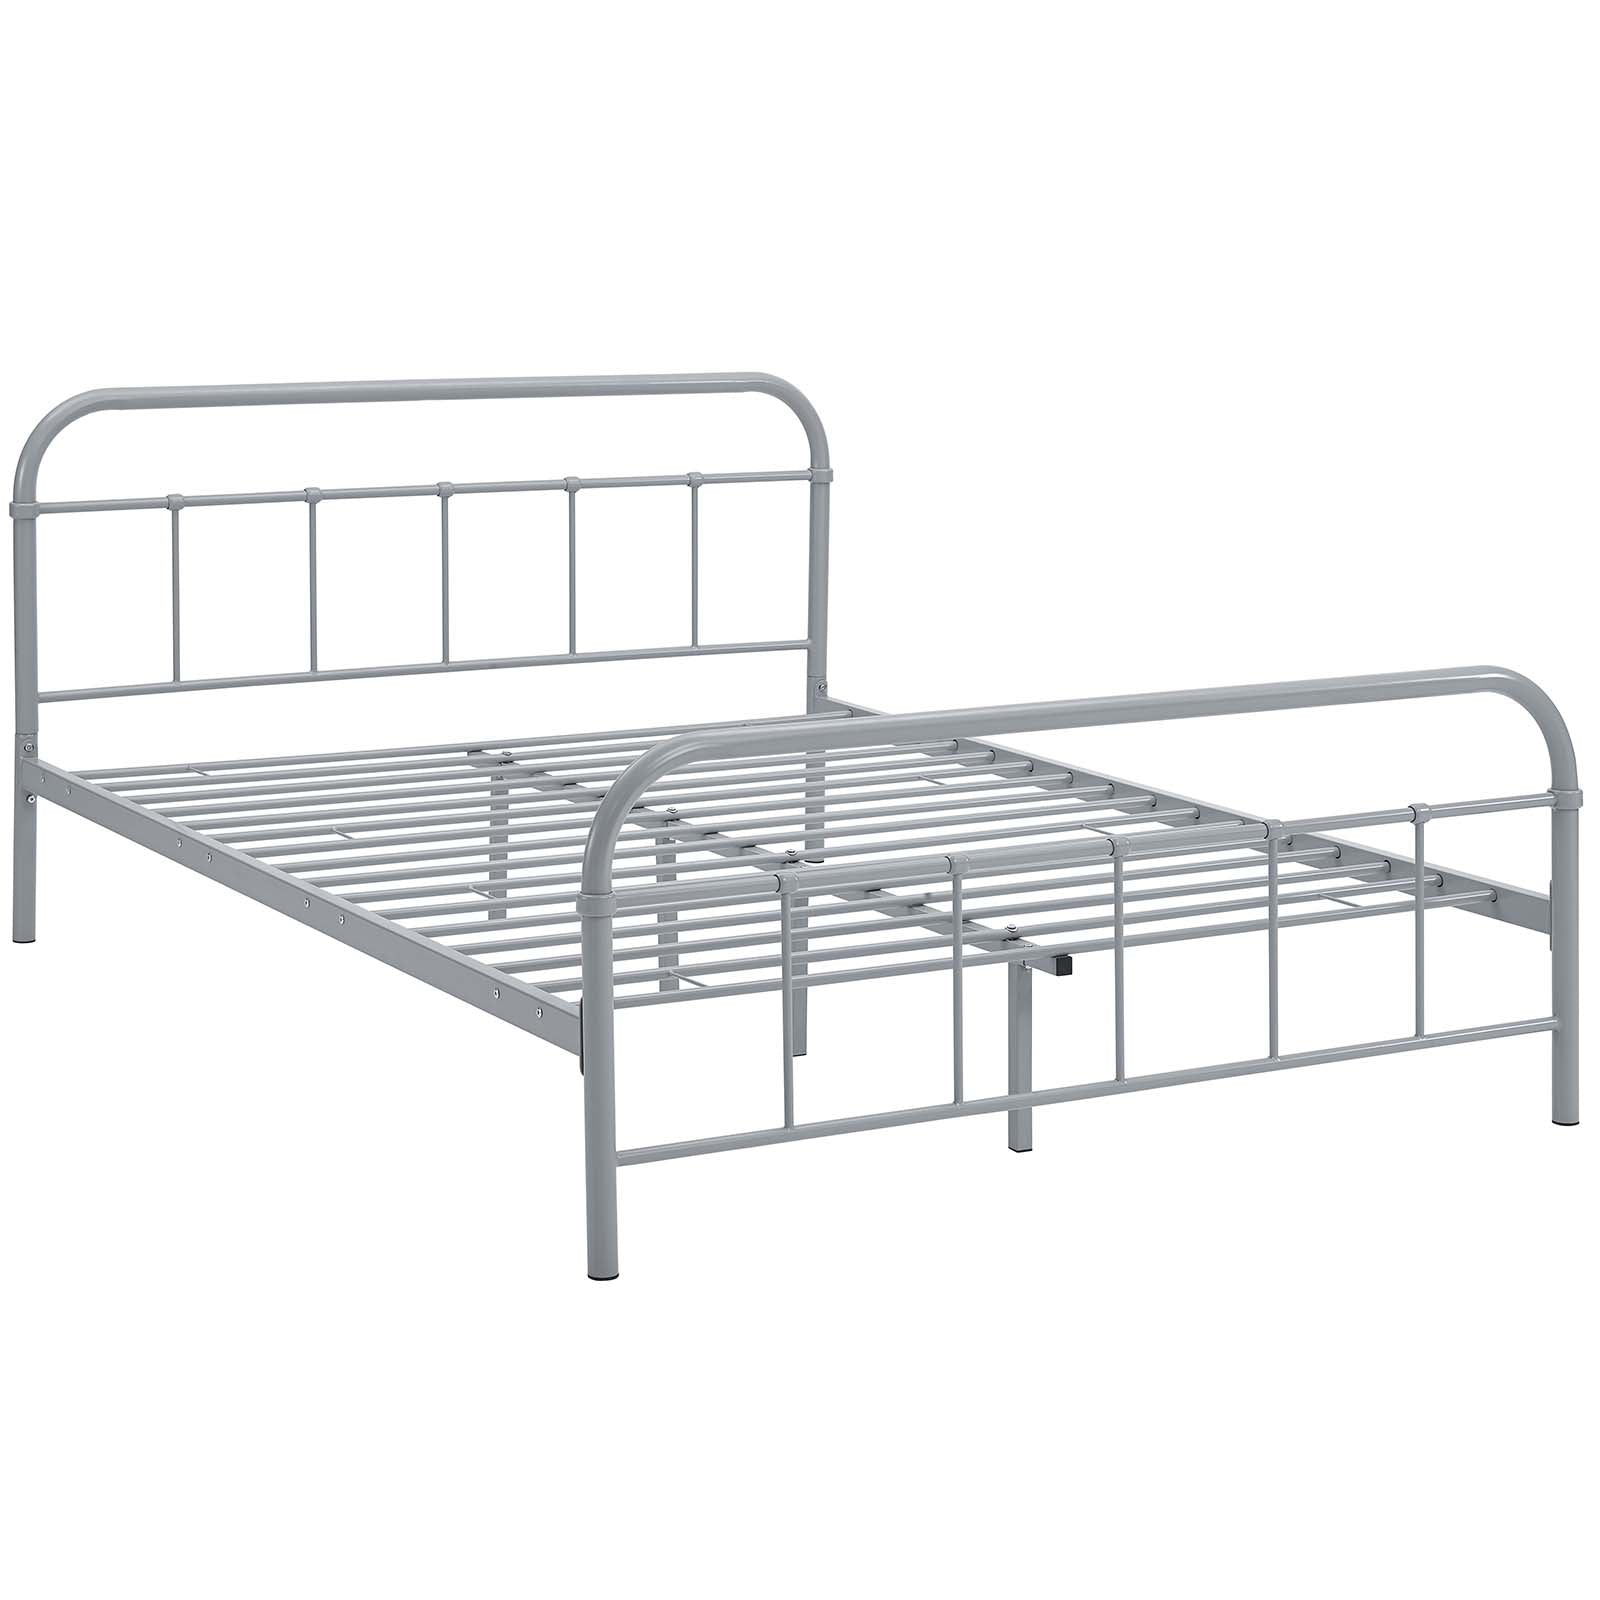 Modway Beds - Maisie Queen Stainless Steel Bed Frame Gray